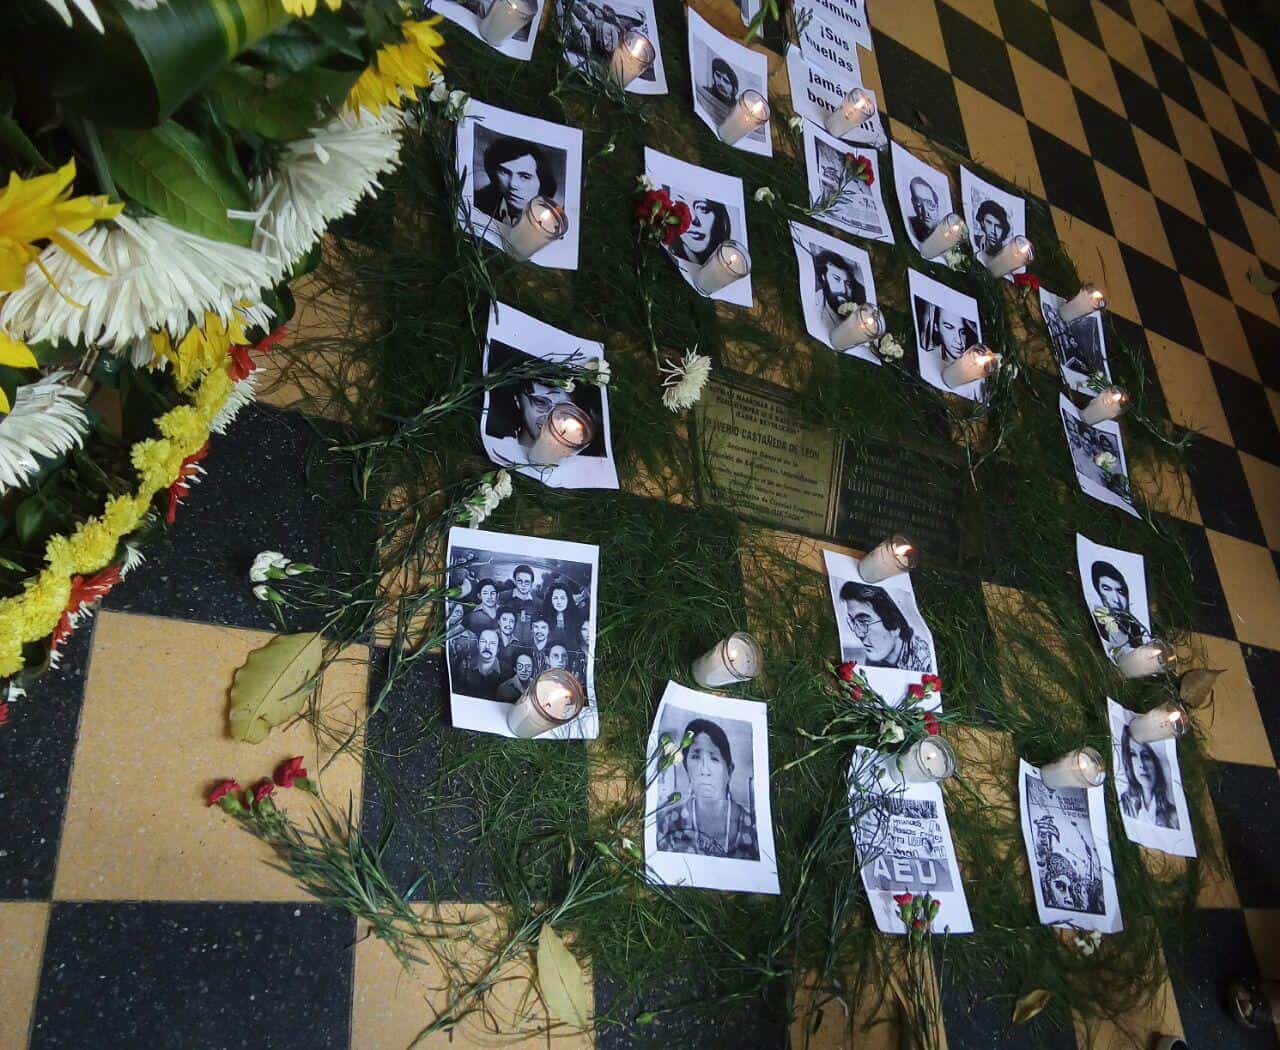 Pictures of disappeared people are placed with candles around a plaque marking the site where student organizer Oliverio Castañeda de León was assassinated.